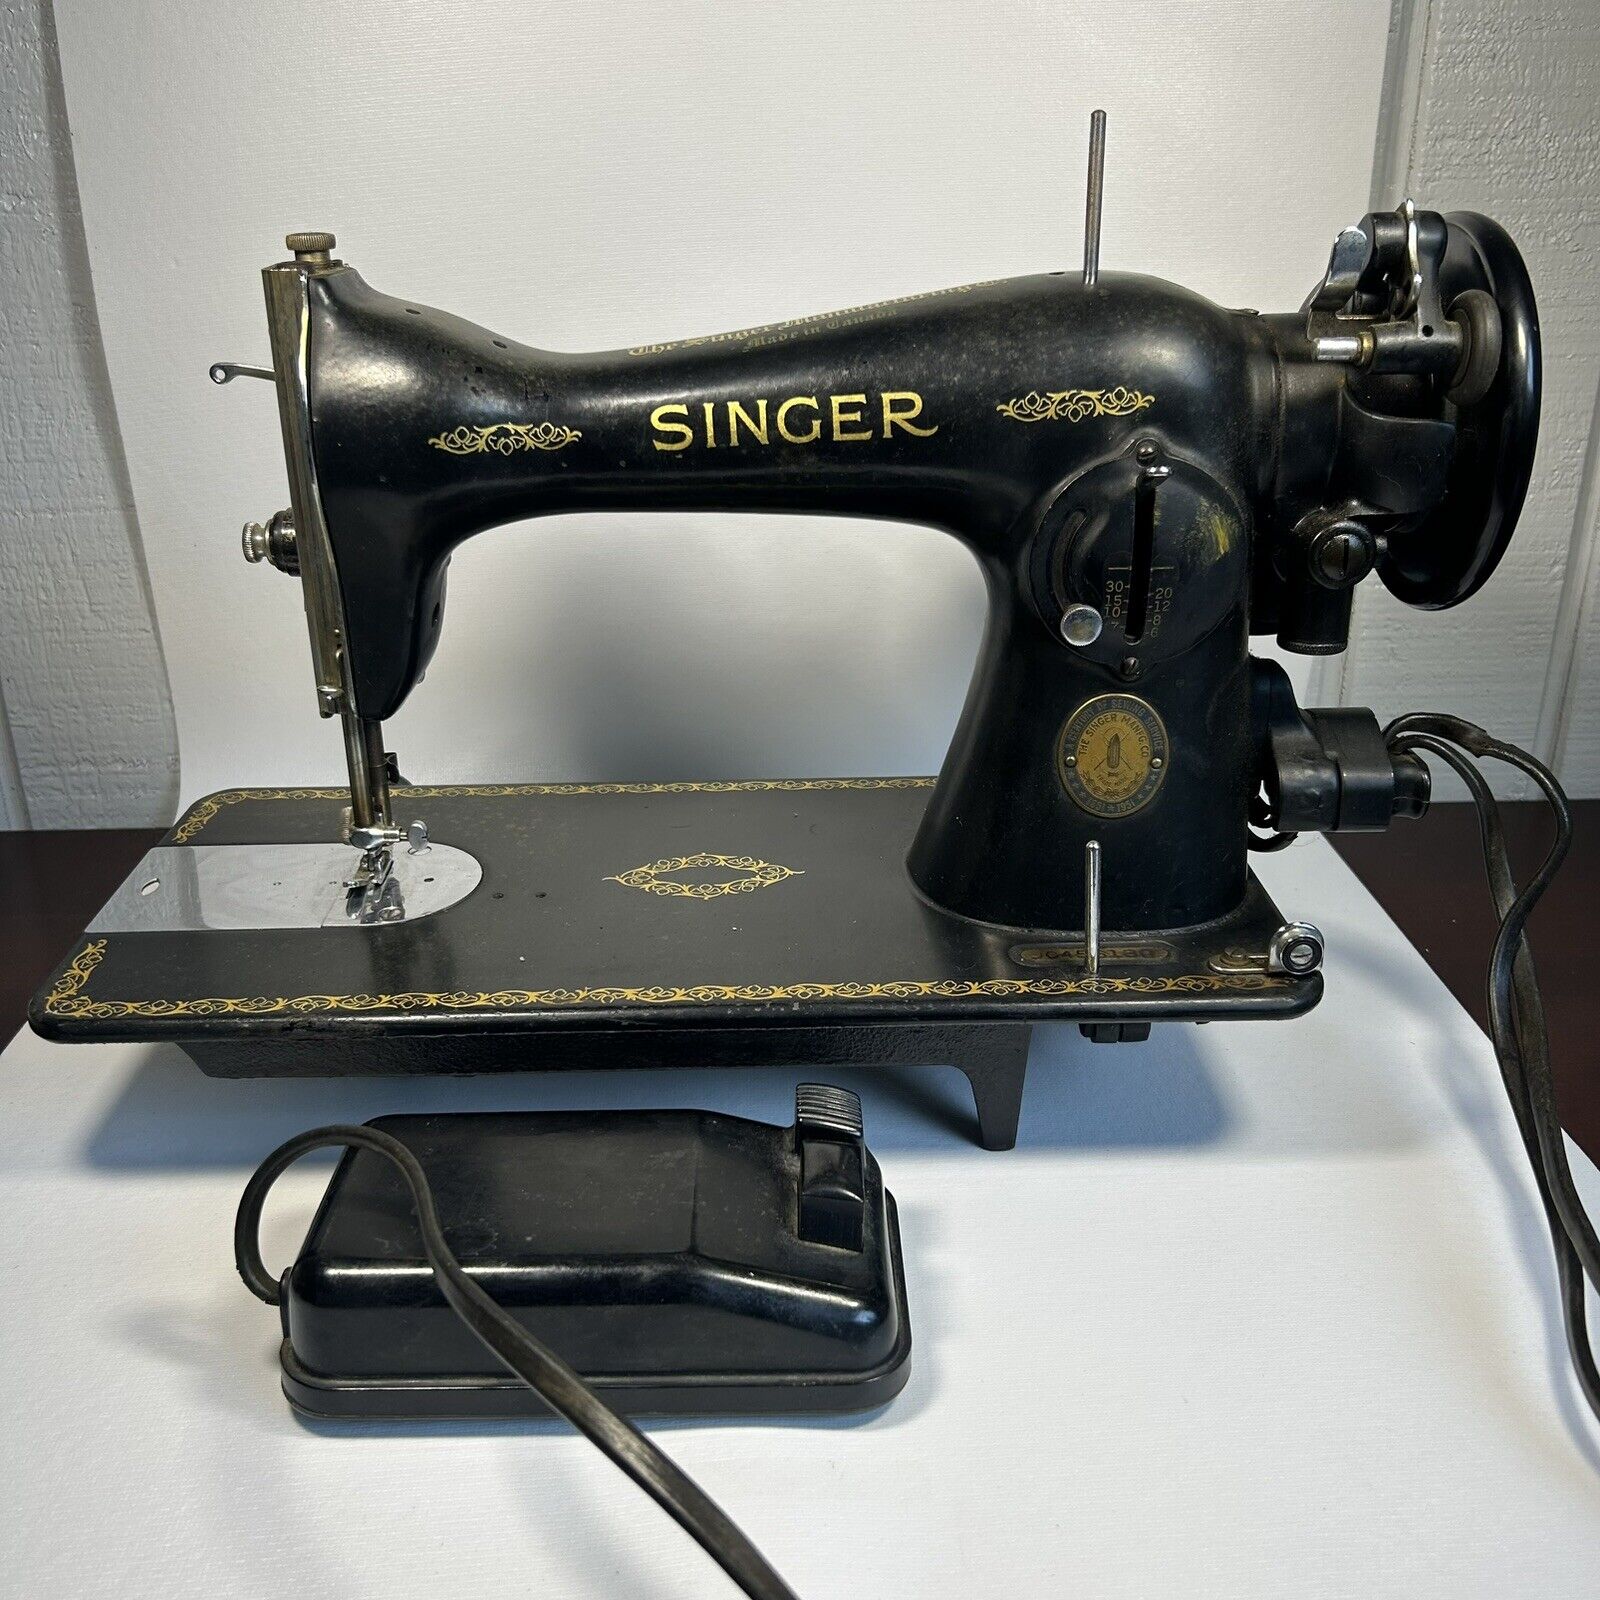 Vintage Singer Sewing Machine Century Of Sewing Model 1951 Made In Canada Tested